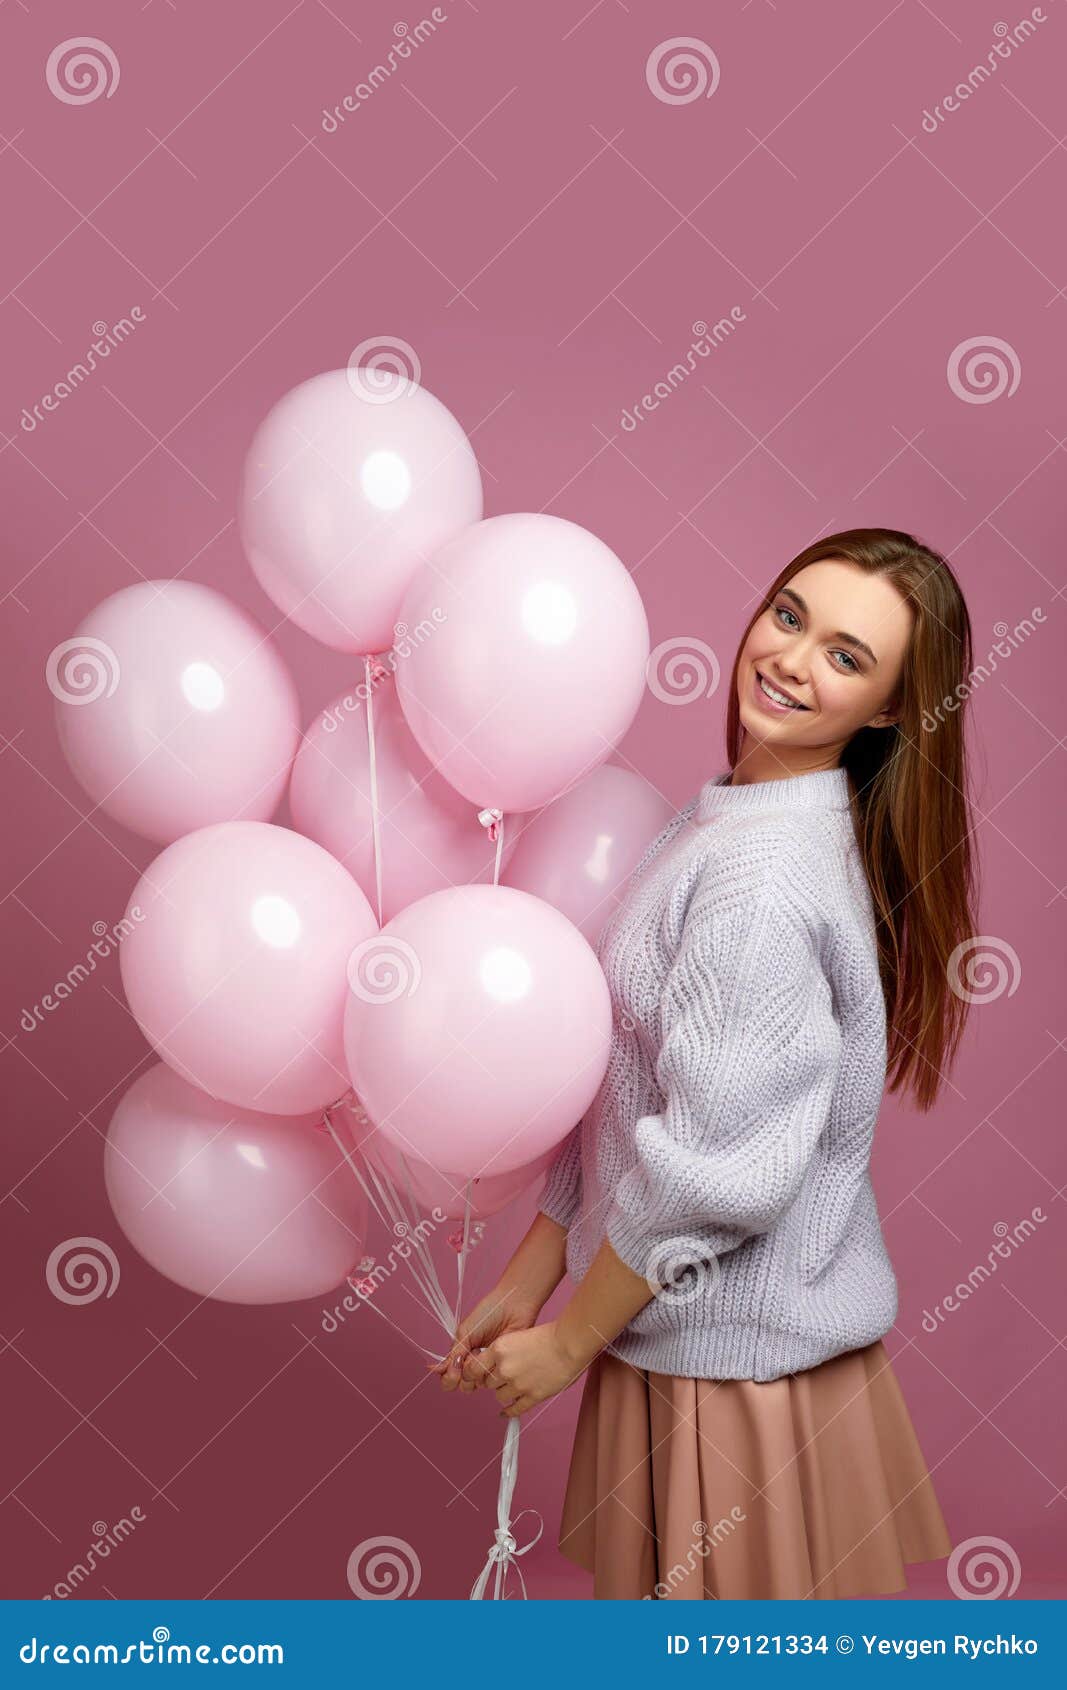 Cheerful birthday woman dressed in slumber suit smiles broadly has cream  around mouth holds glass of cocktail and doughnuts with candles poses near  table full of desserts surrounded by balloons - Stock